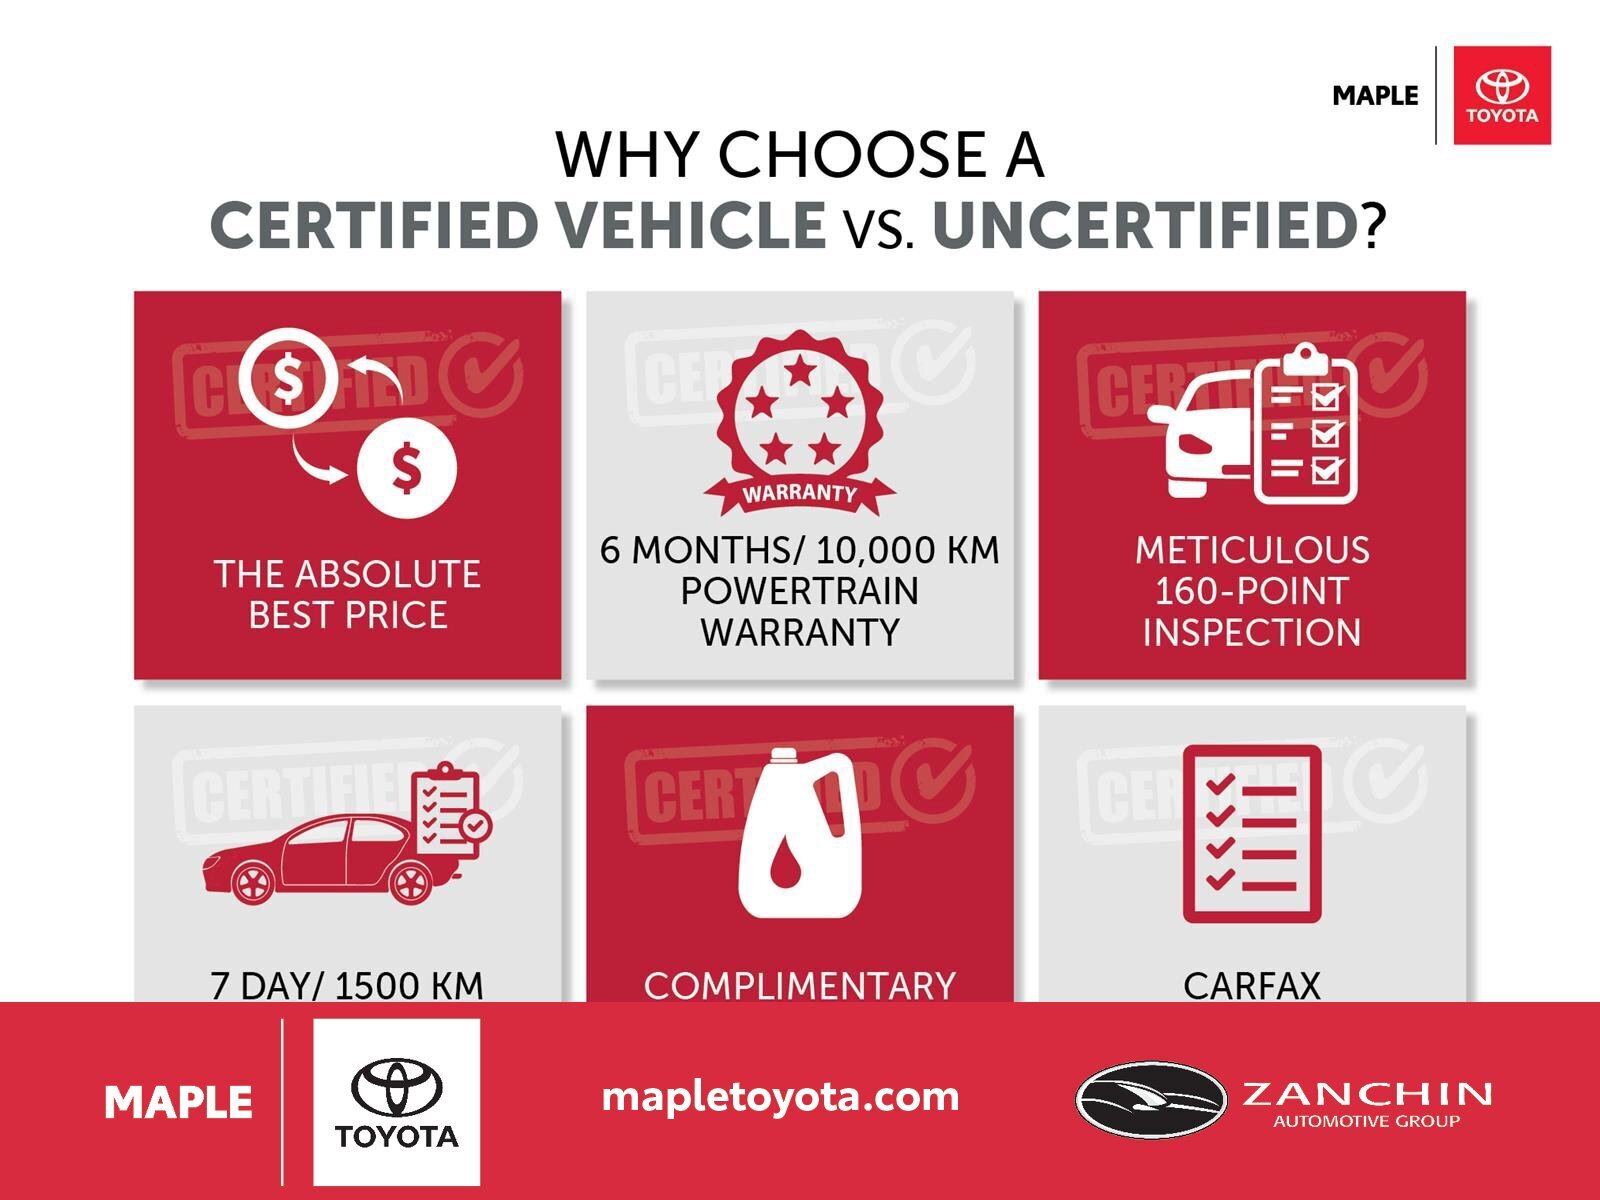 2010 Toyota RAV4 ONE OWNER/UNCERTIFIED-YOU CERTIFY, YOU SAVE!!!